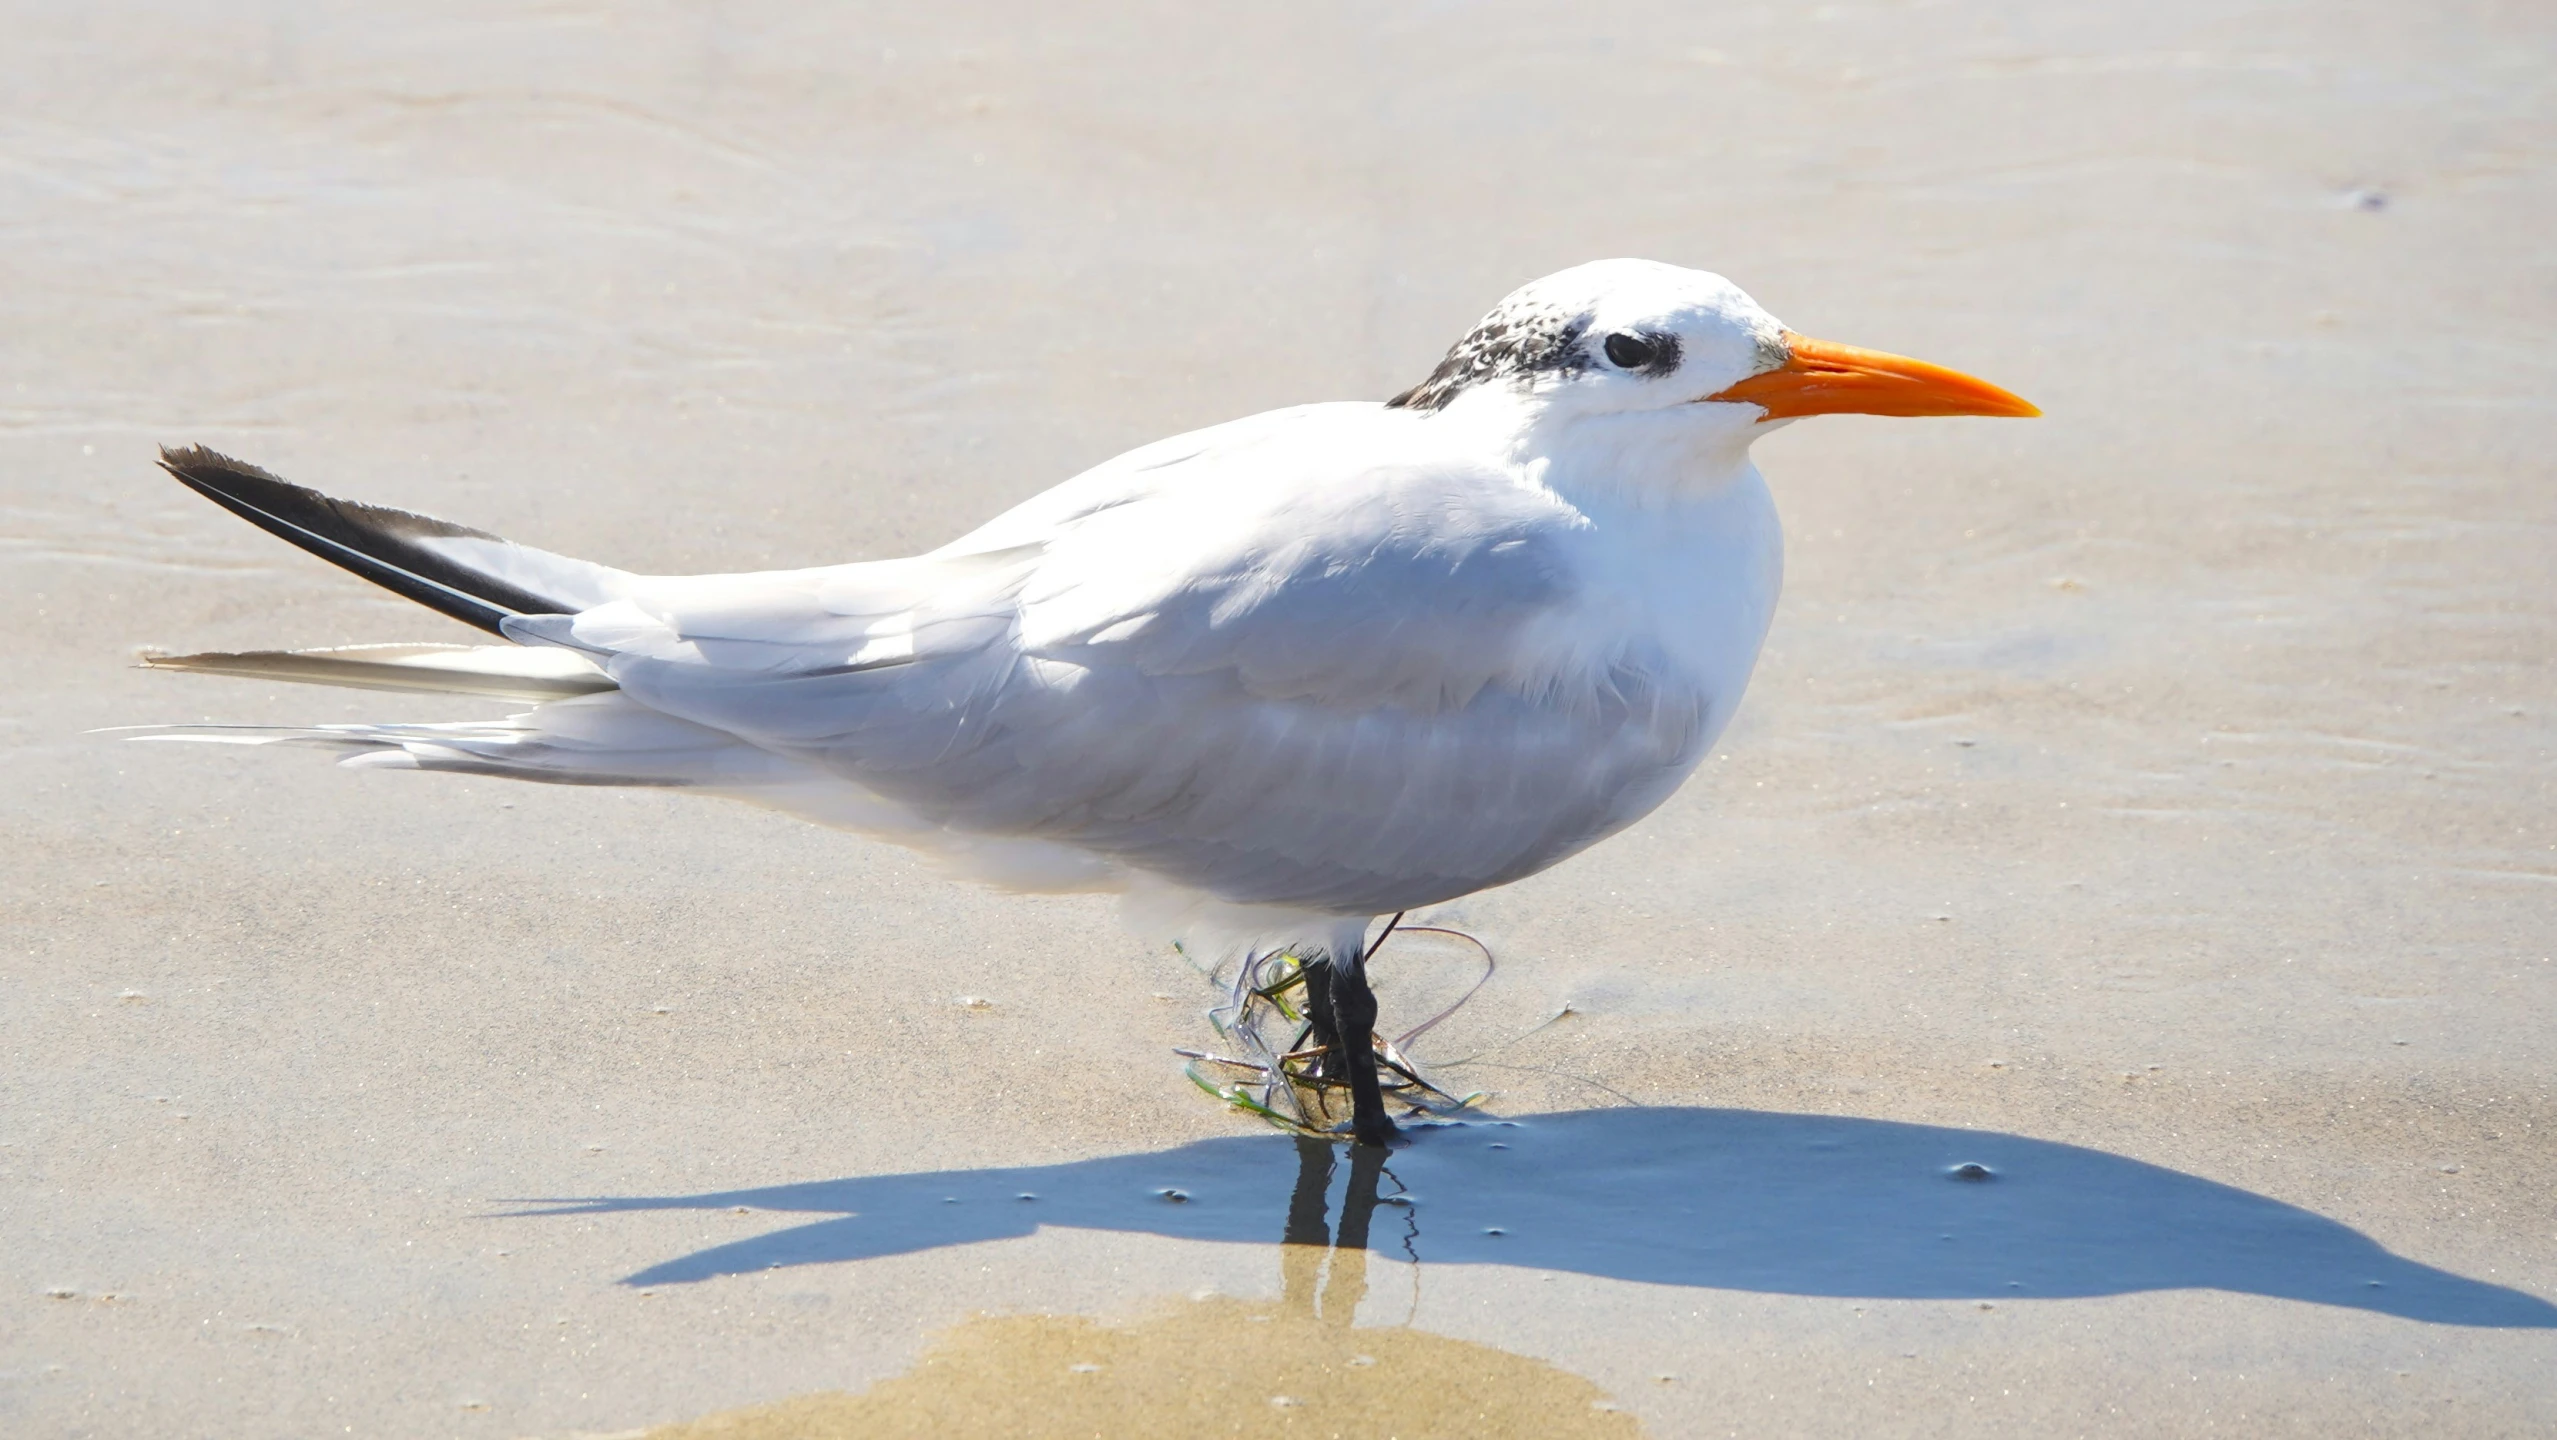 a seagull standing on the beach alone, with its reflection in the wet sand